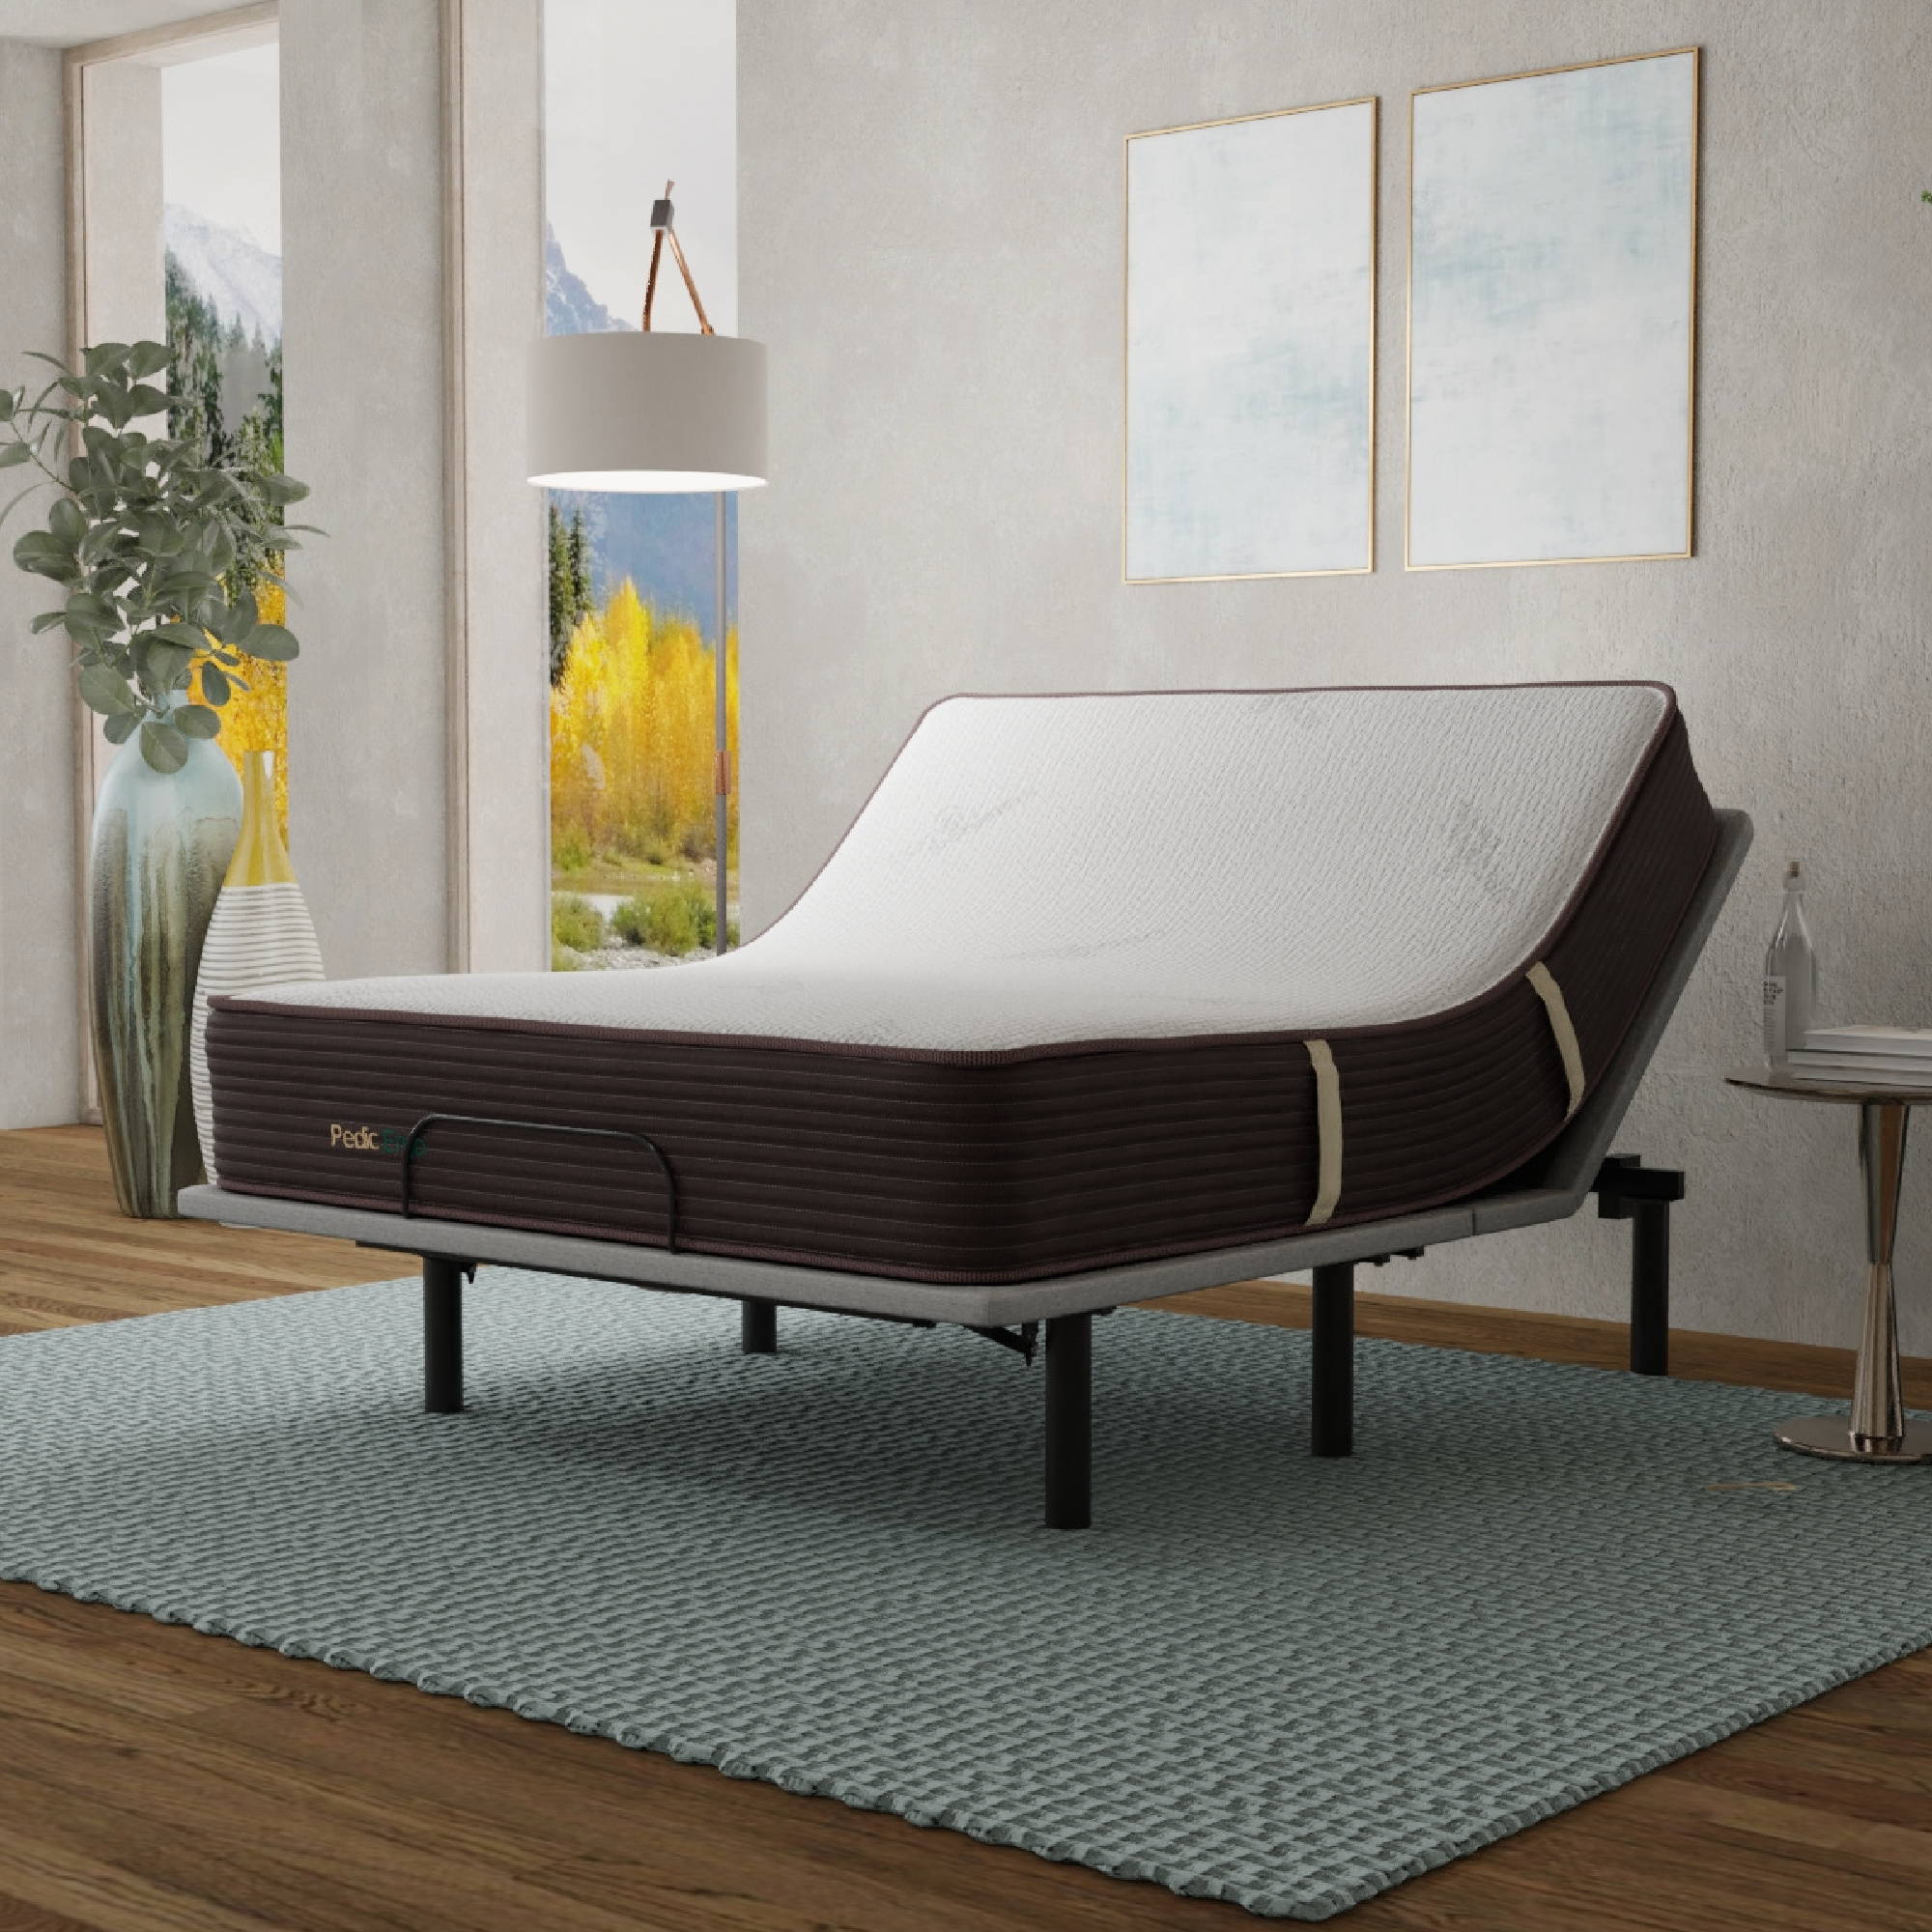 CoreLift adjustable base in a bedroom setting with a copper infused mattress, lifting up the head.